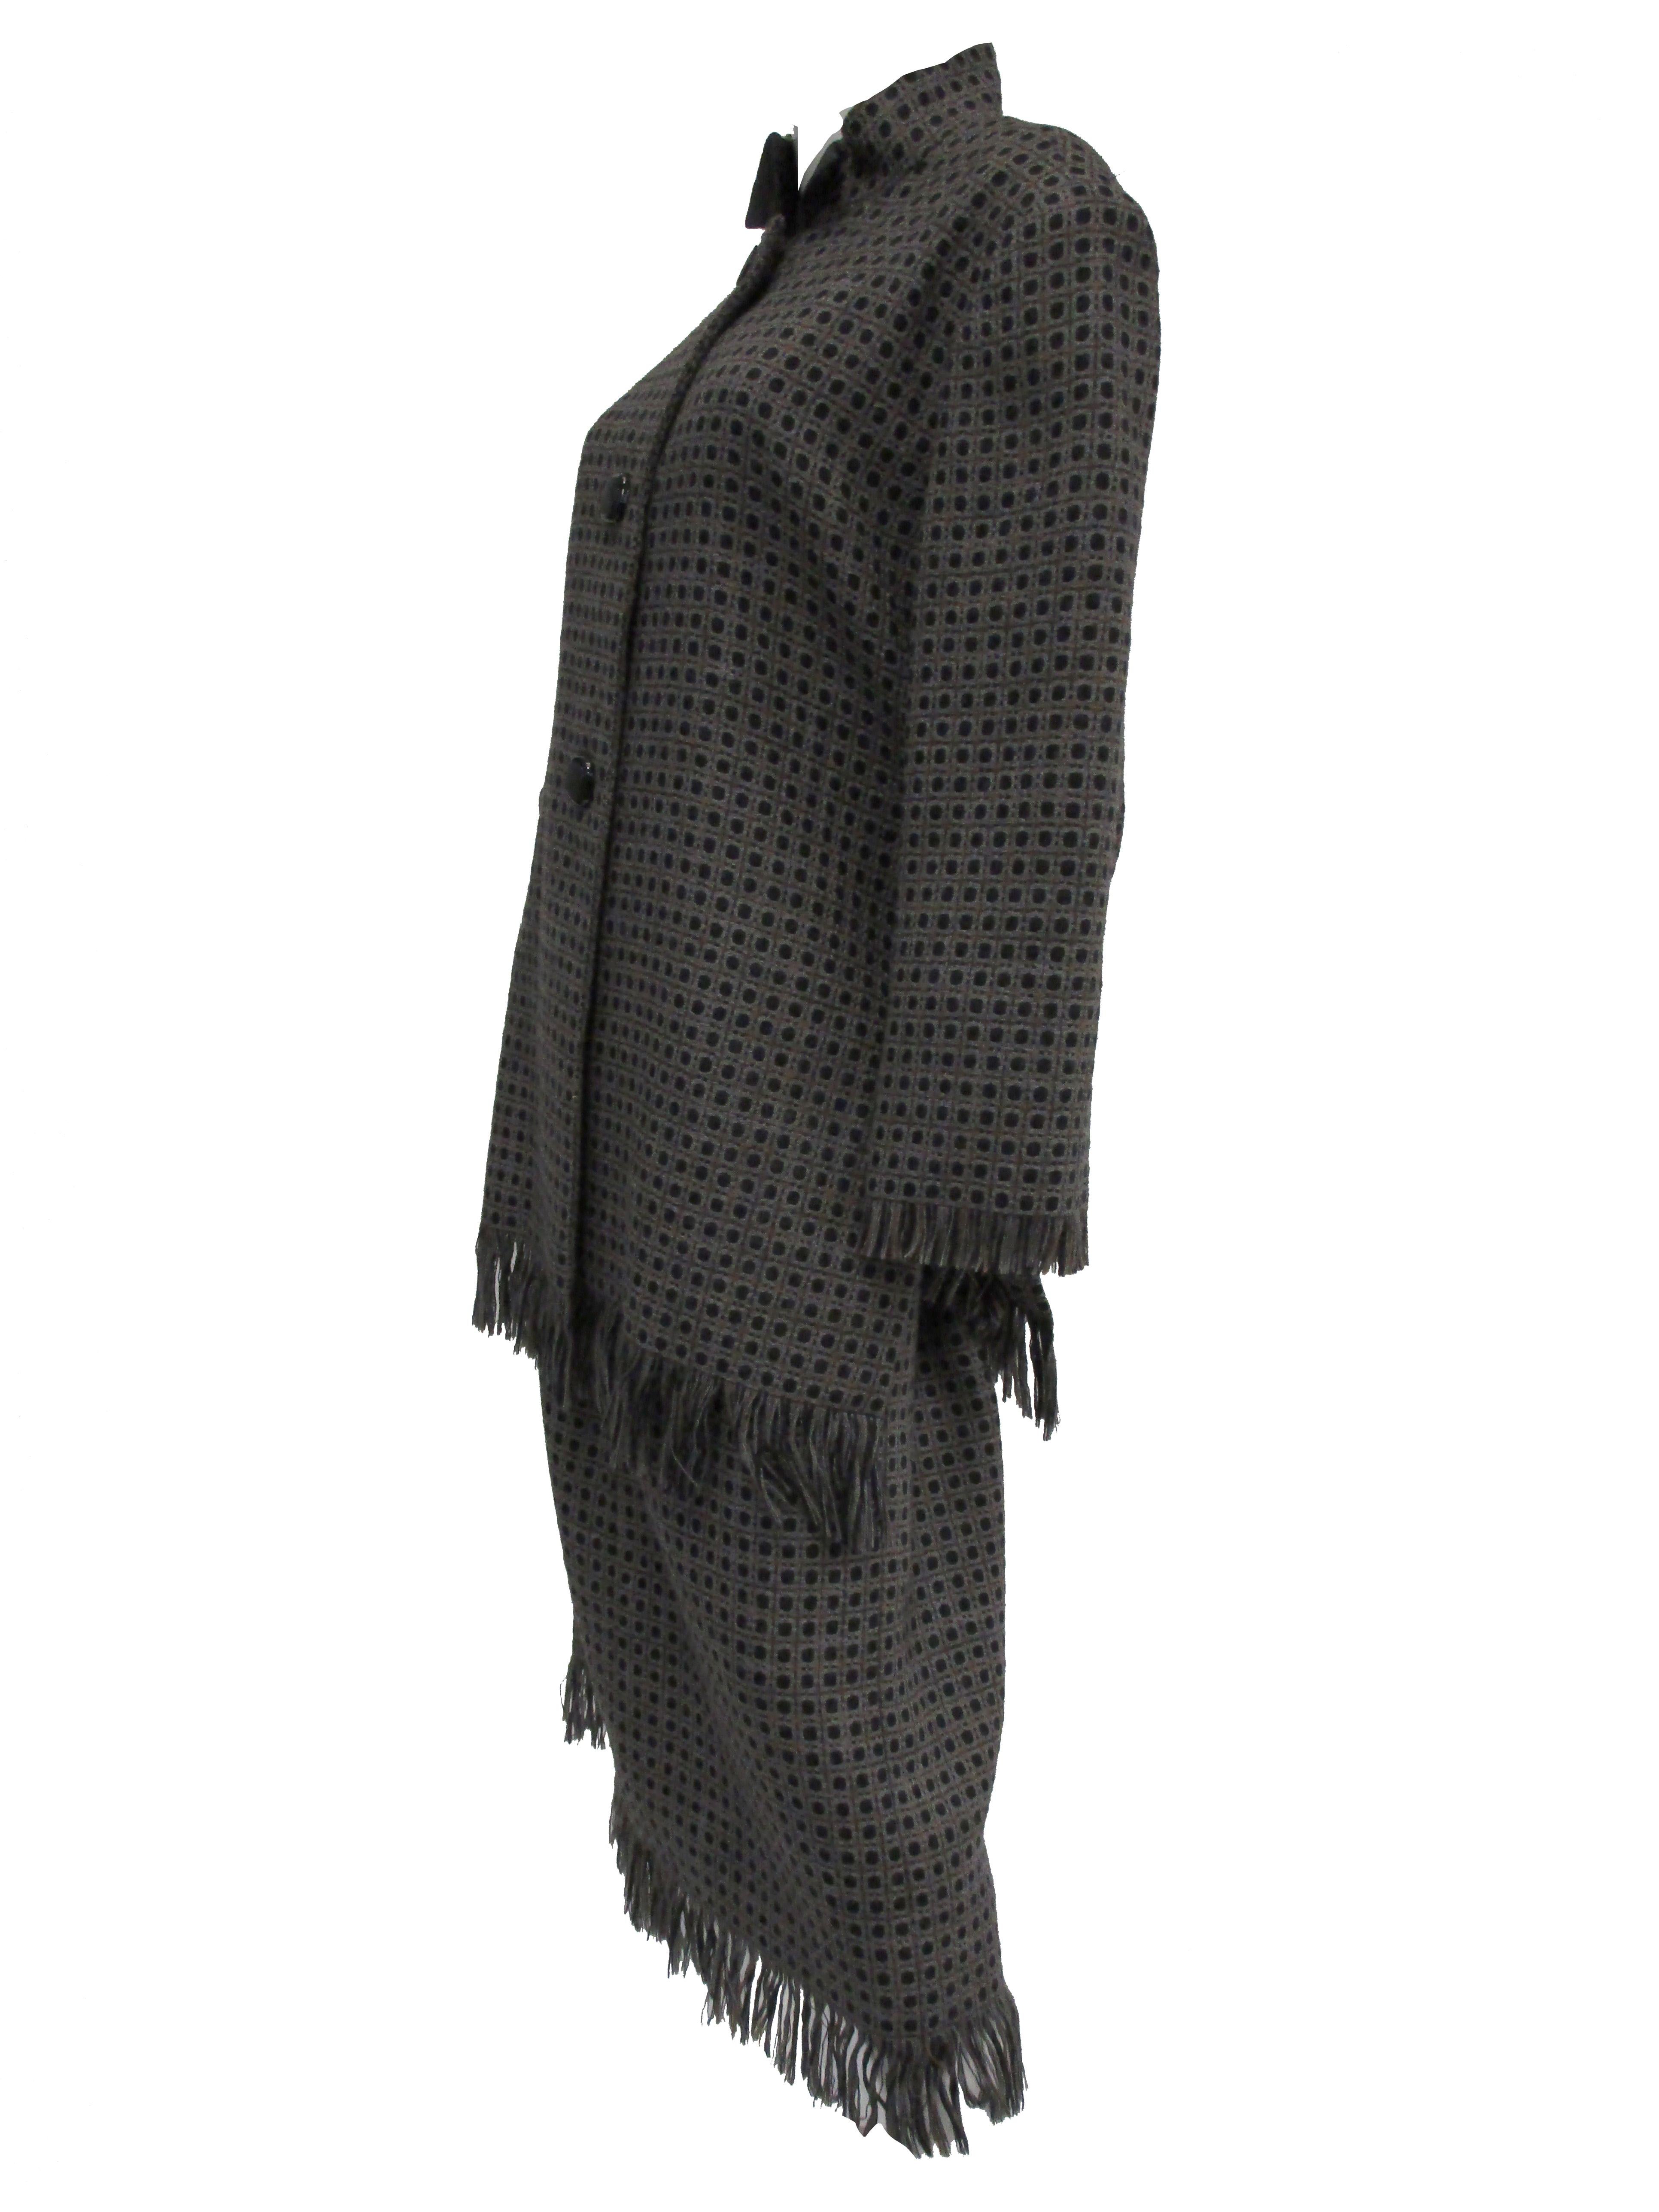 Fabulous heavy wool skirt suit by Galanos! The knee length skirt has a loose A - line silhouette with fabulous long fringes at the hem. The jacket has a loose and boxy fit, with straight and structured shoulders, a mandarin collar with wing tips,